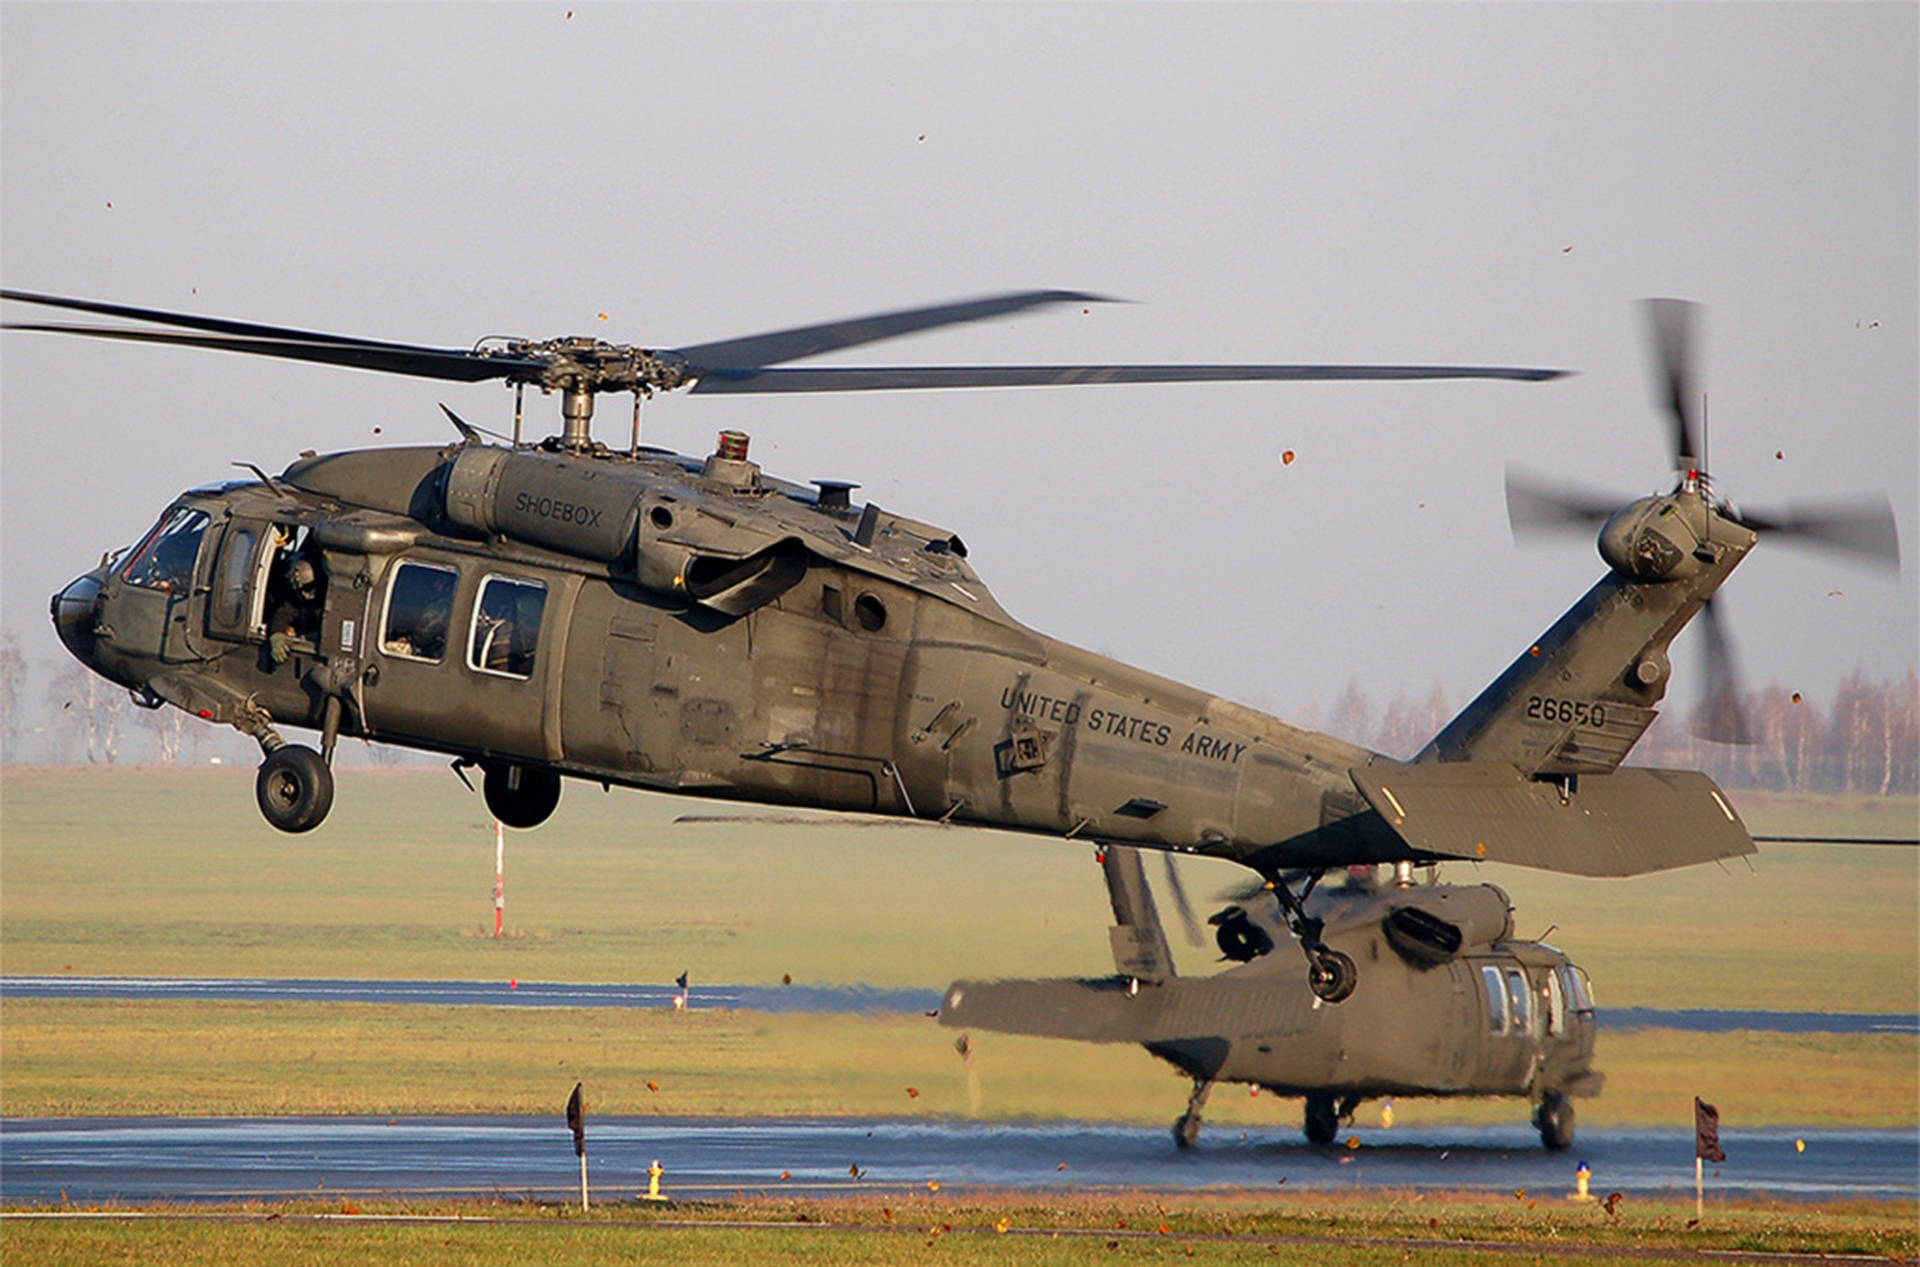 “The Black Hawk helicopter is renowned for its superior agility and maneuverability.” Wallpaper